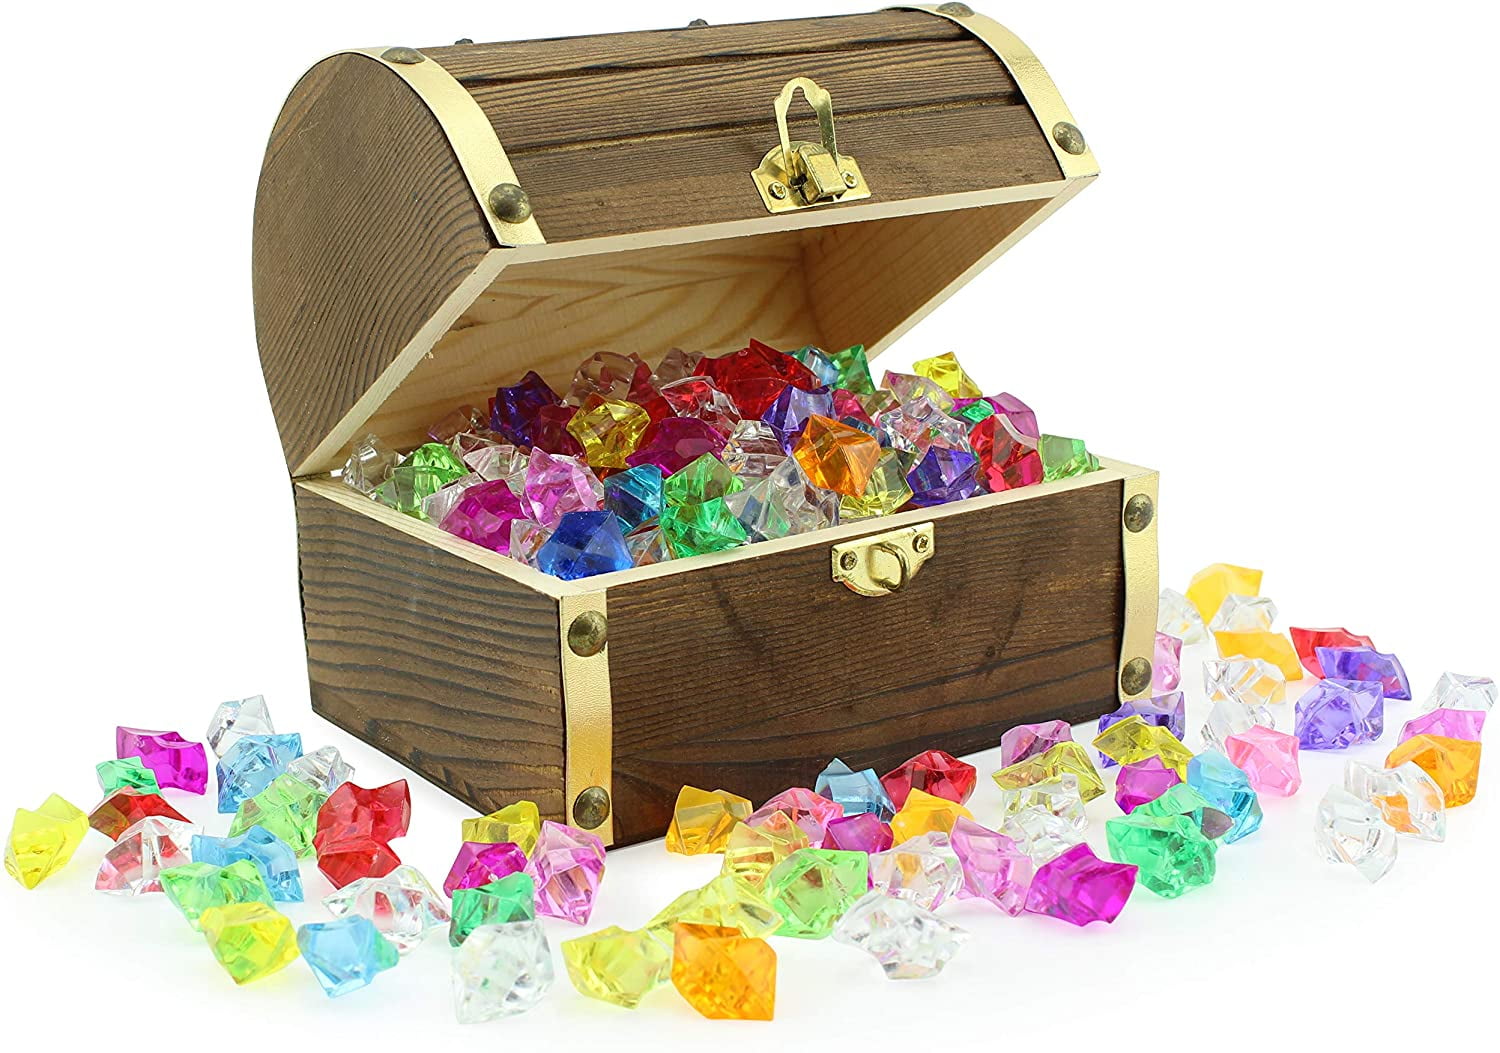 12 Gold and Clear 2.5 tall Mini Treasure Chests Favor Boxes